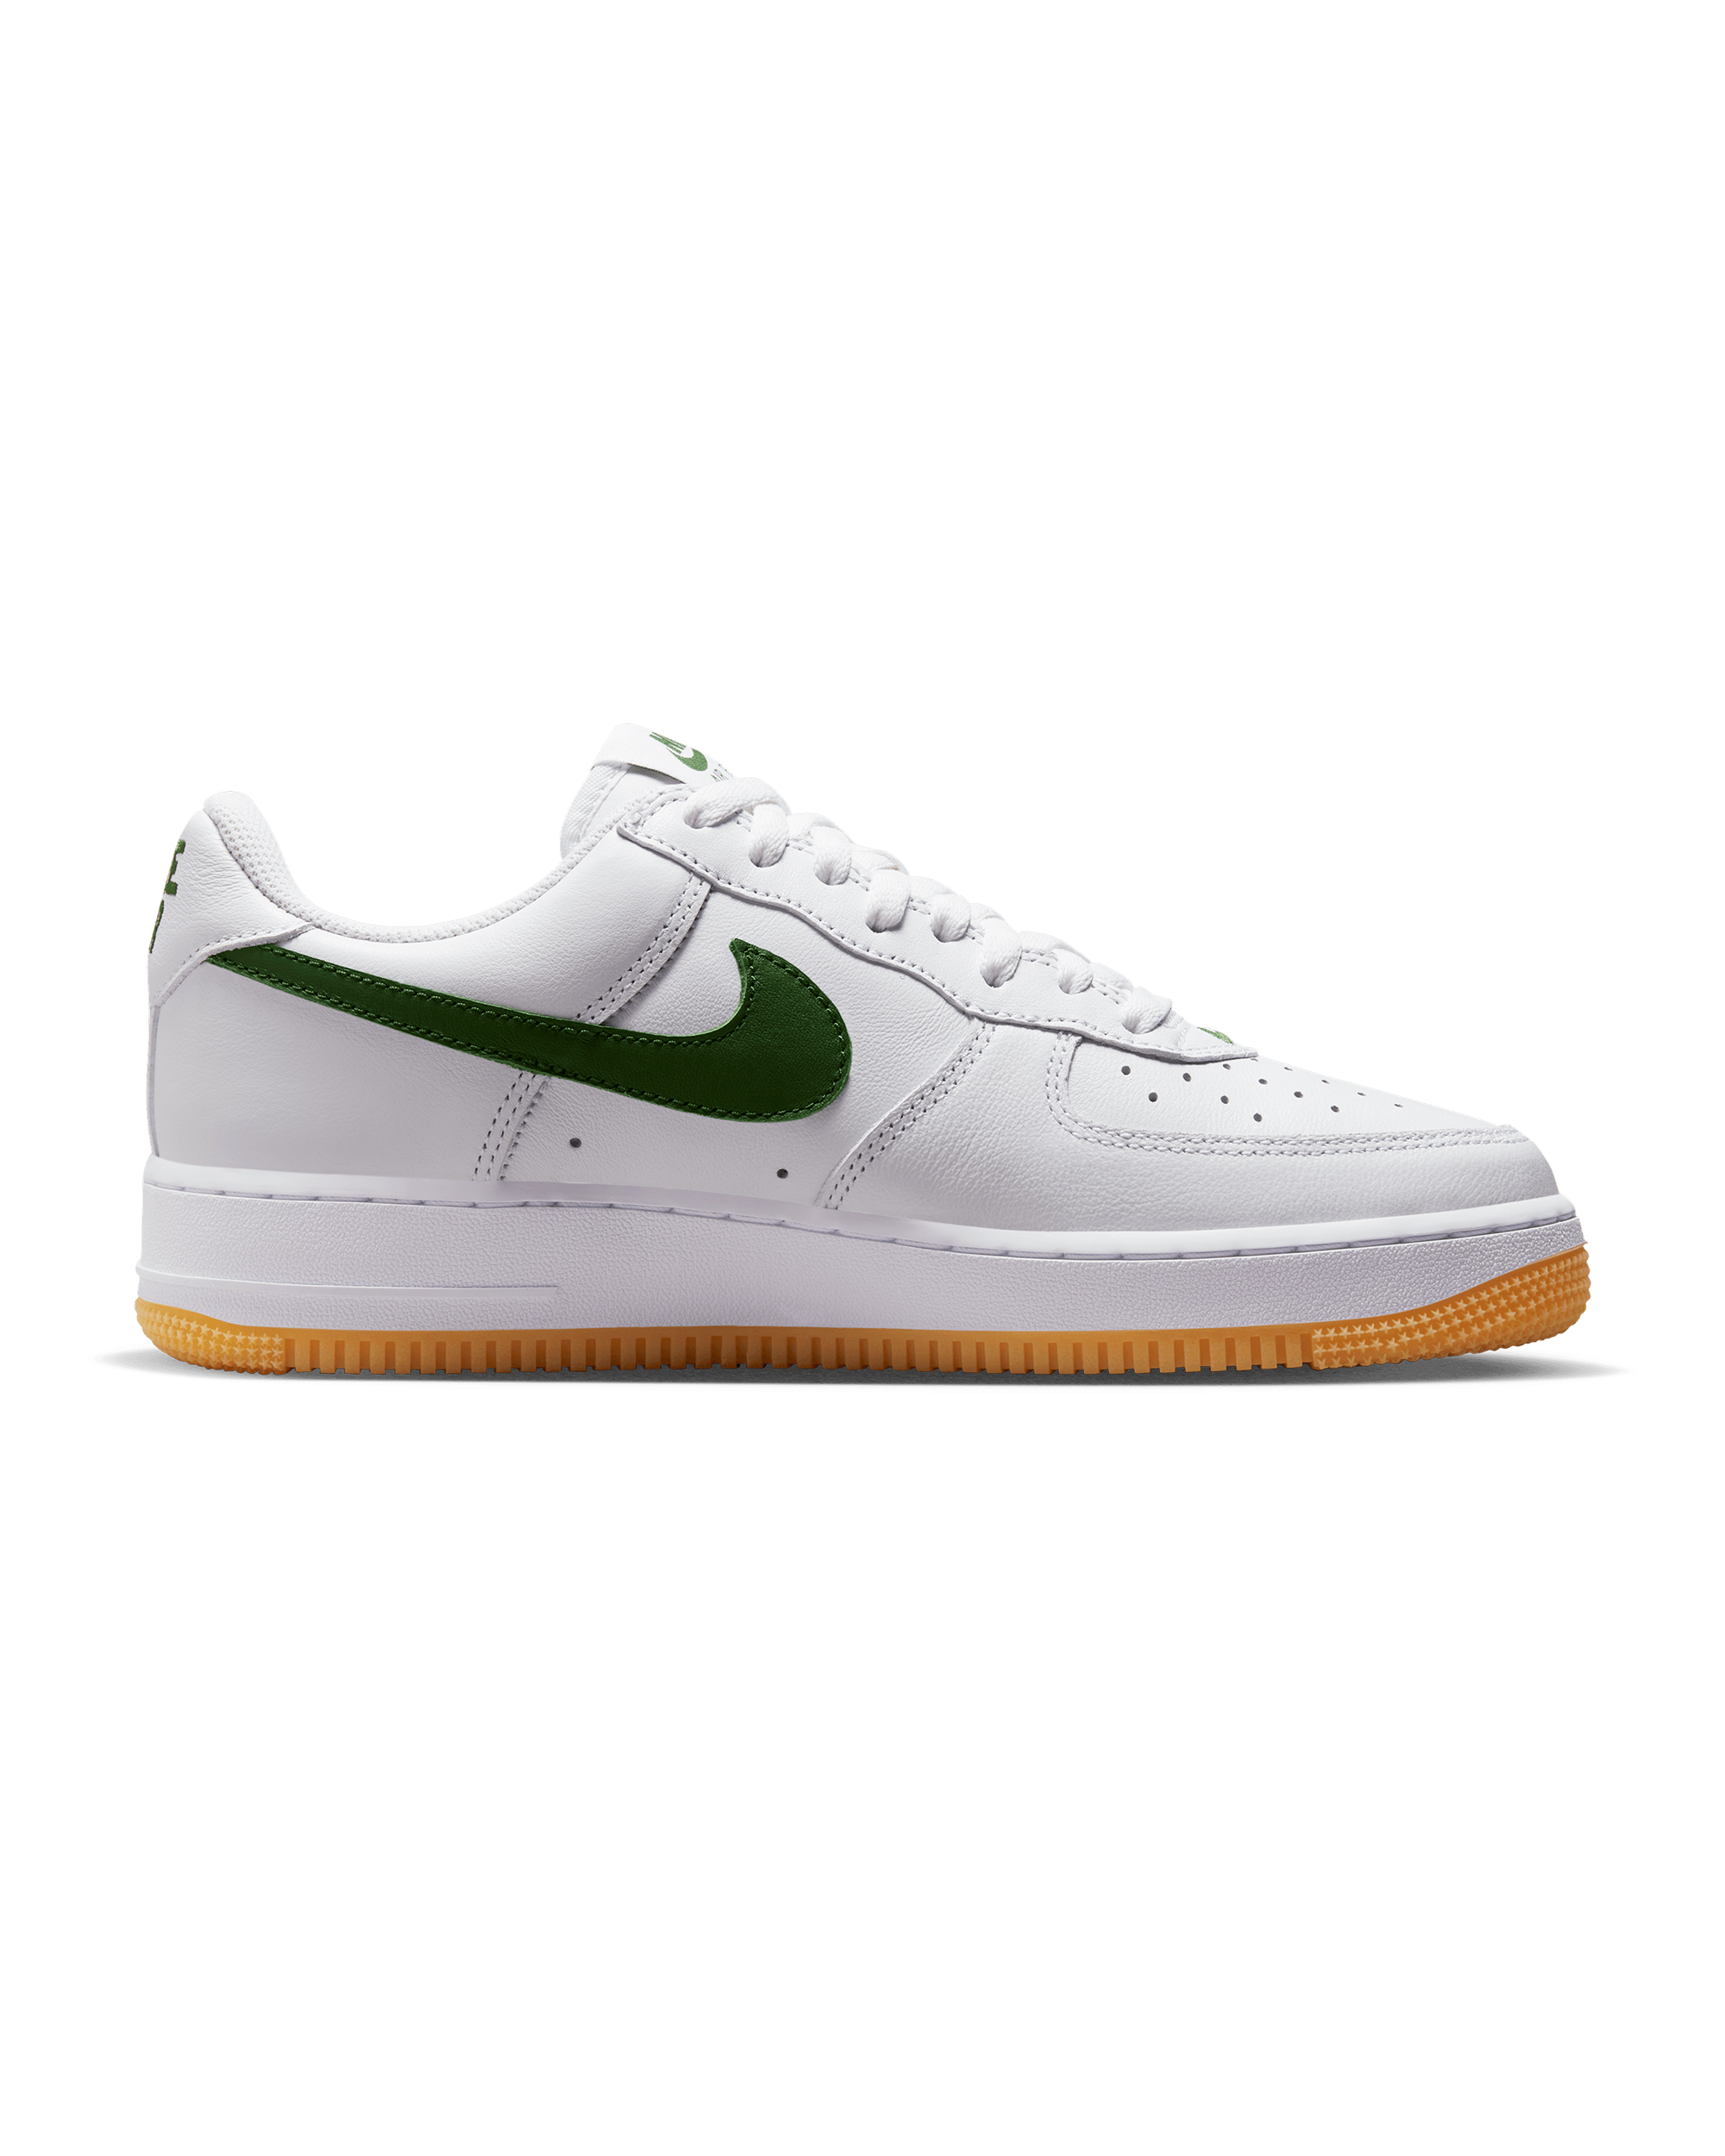 Air Force 1 Low Retro - White / Forest Green / Yellow Gum